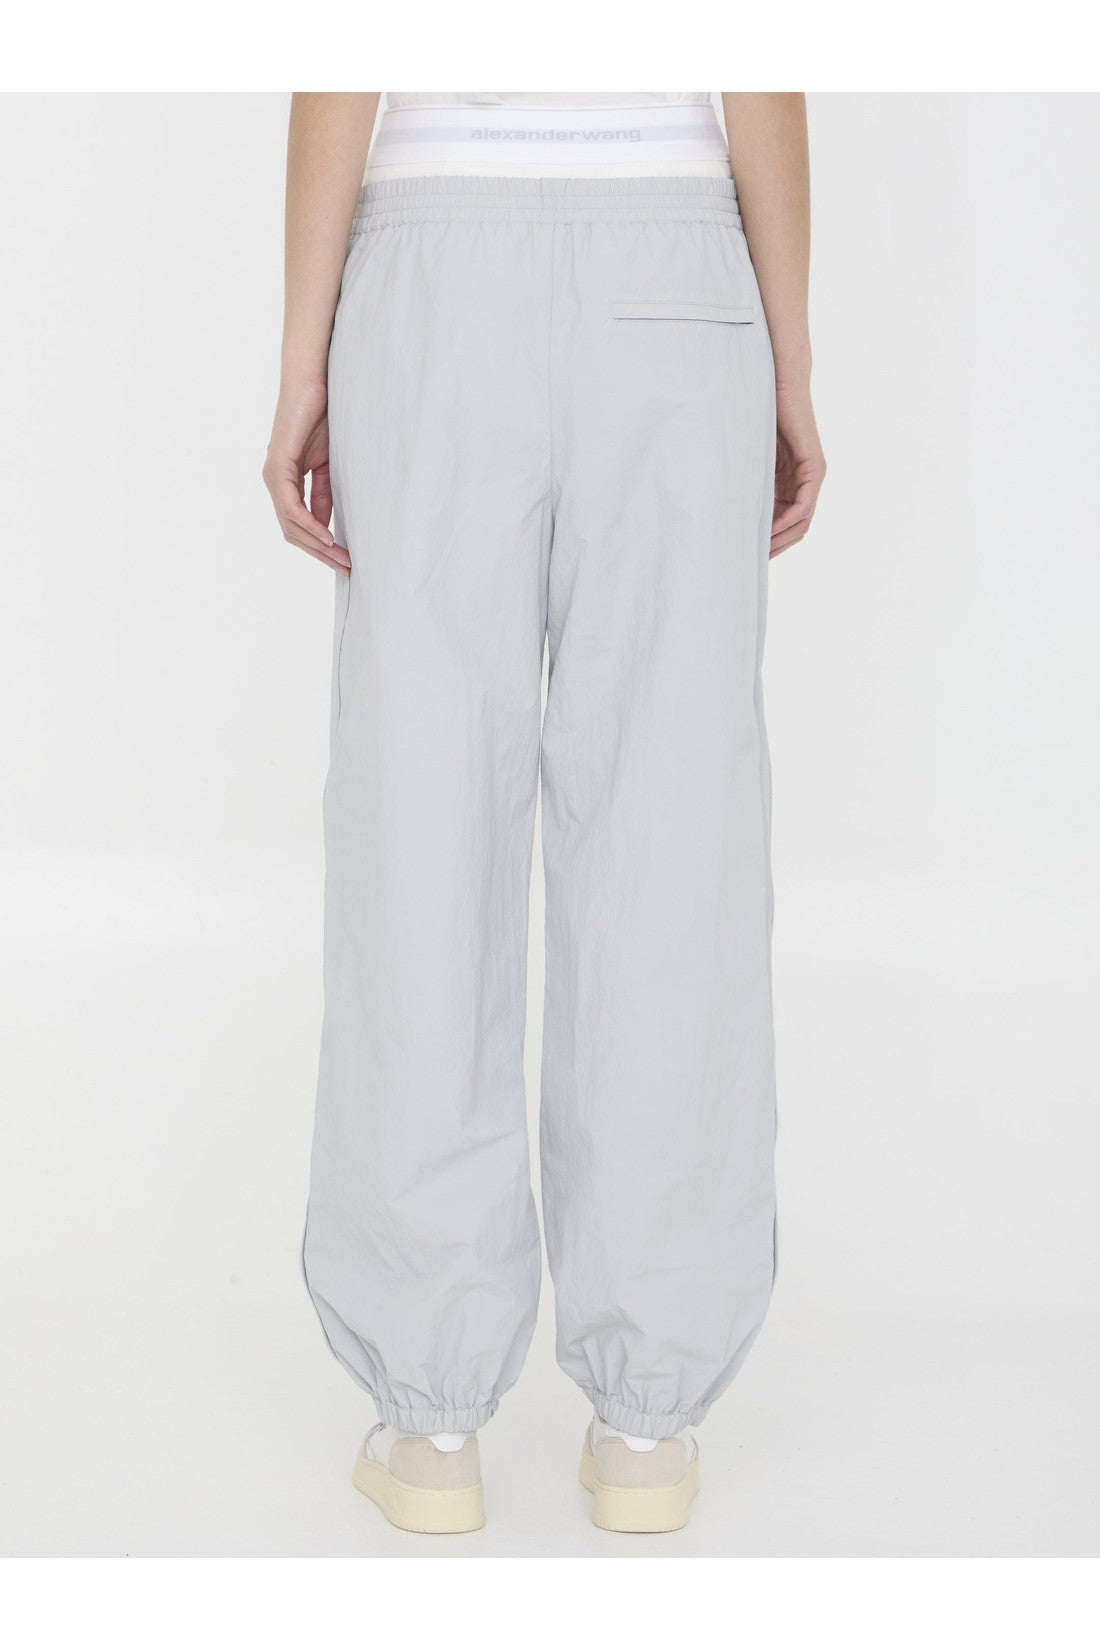 Track pants with pre-styled underwear